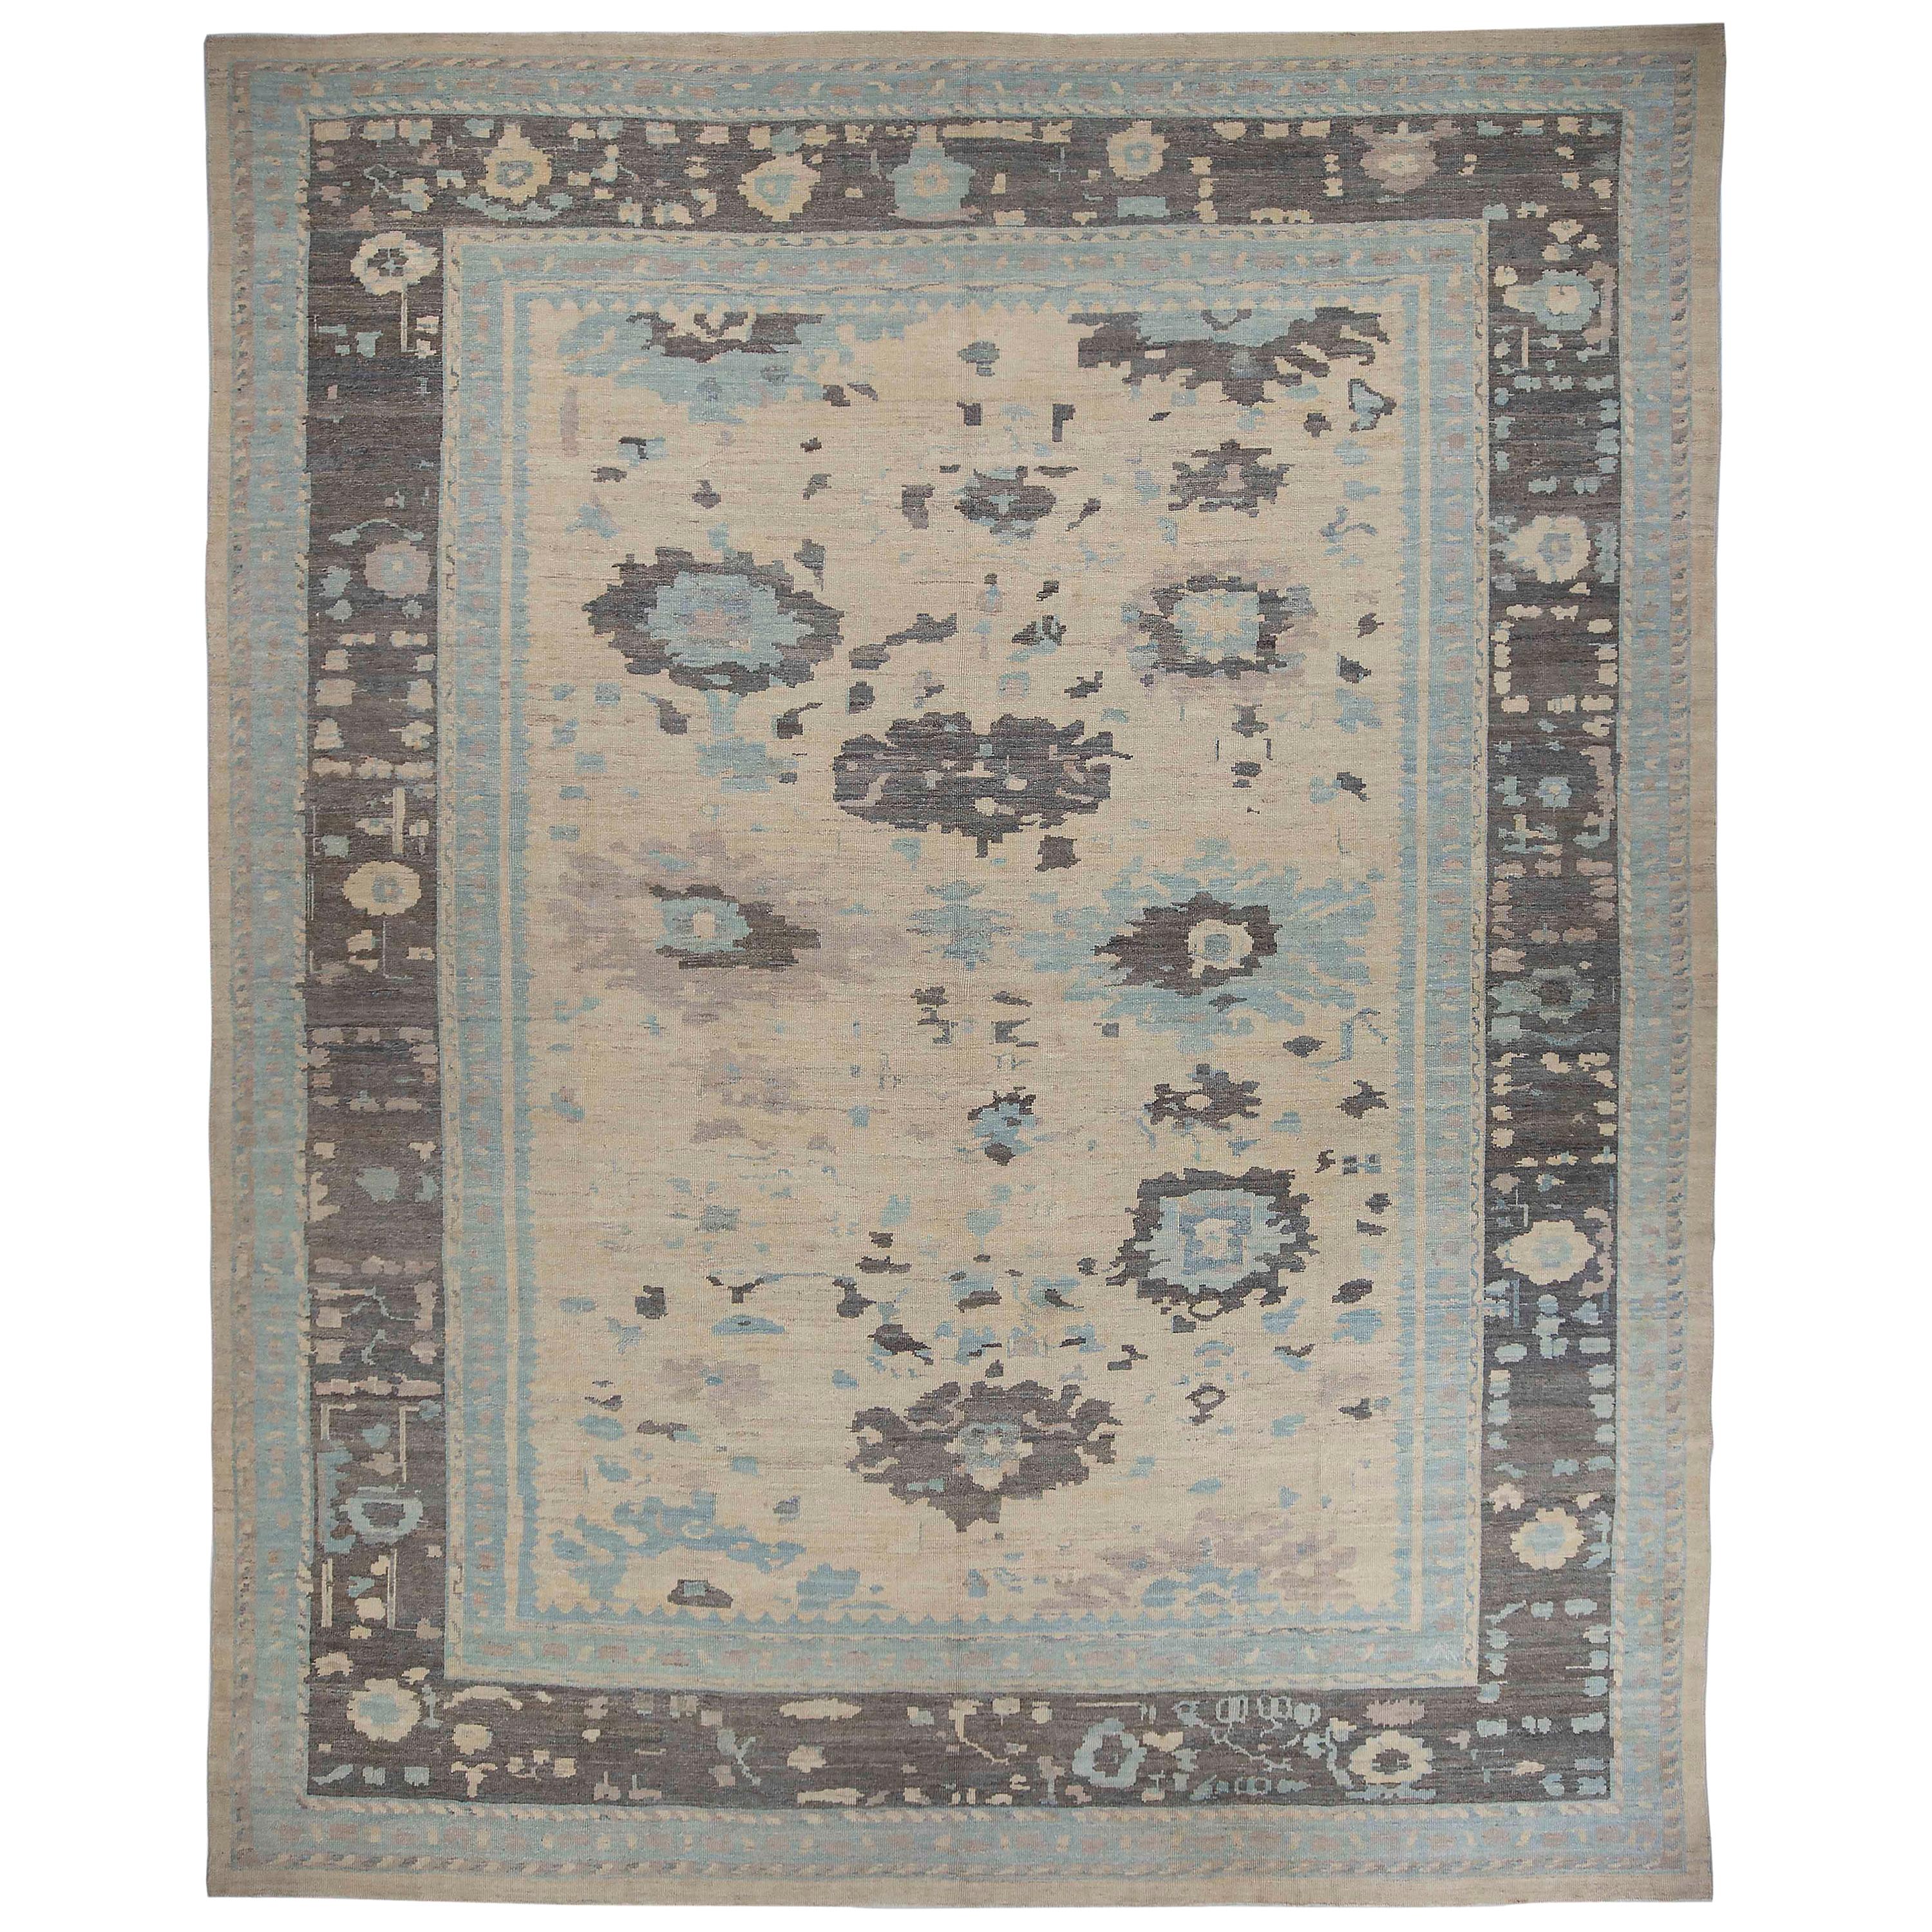 Persian Oushak Style Rug with Blue and Gray Floral Details on Beige Centerfield